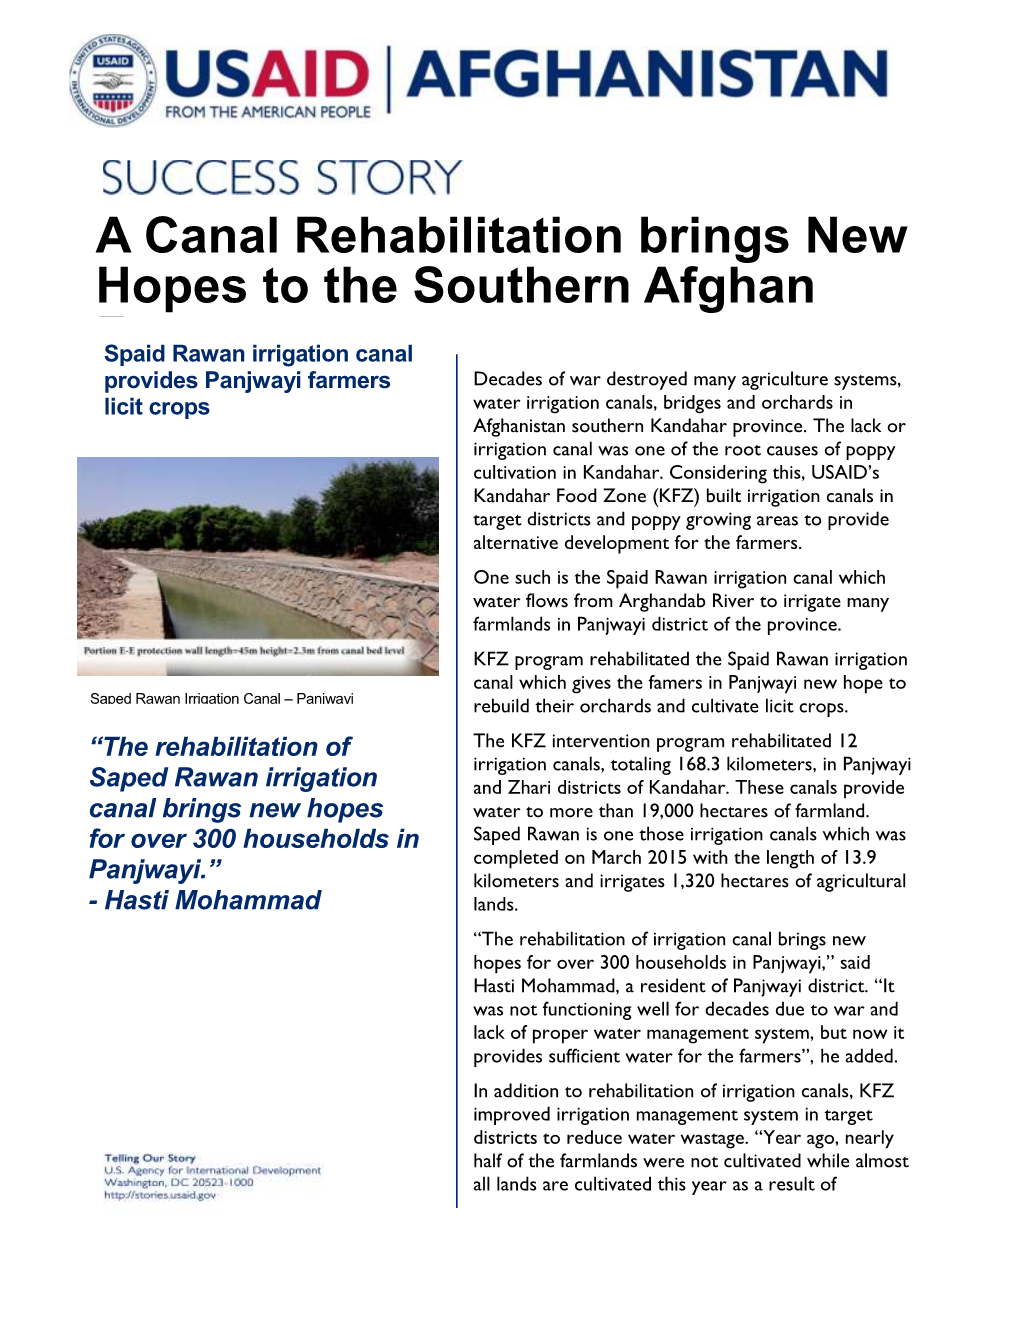 A Canal Rehabilitation Brings New Hopes to the Southern Afghan